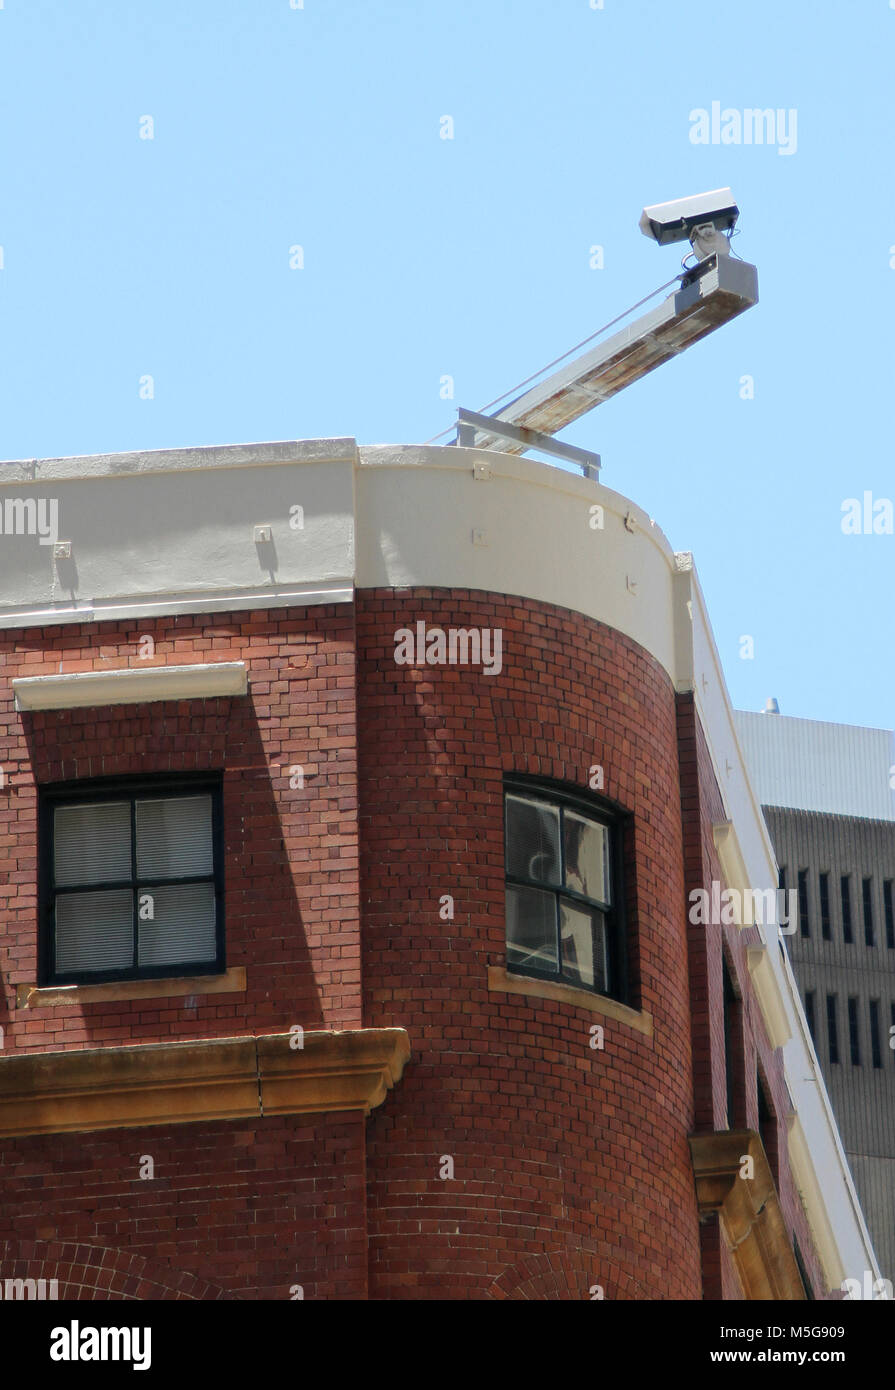 Security camera attached to the roof of a building, Sydney, Australia Stock Photo